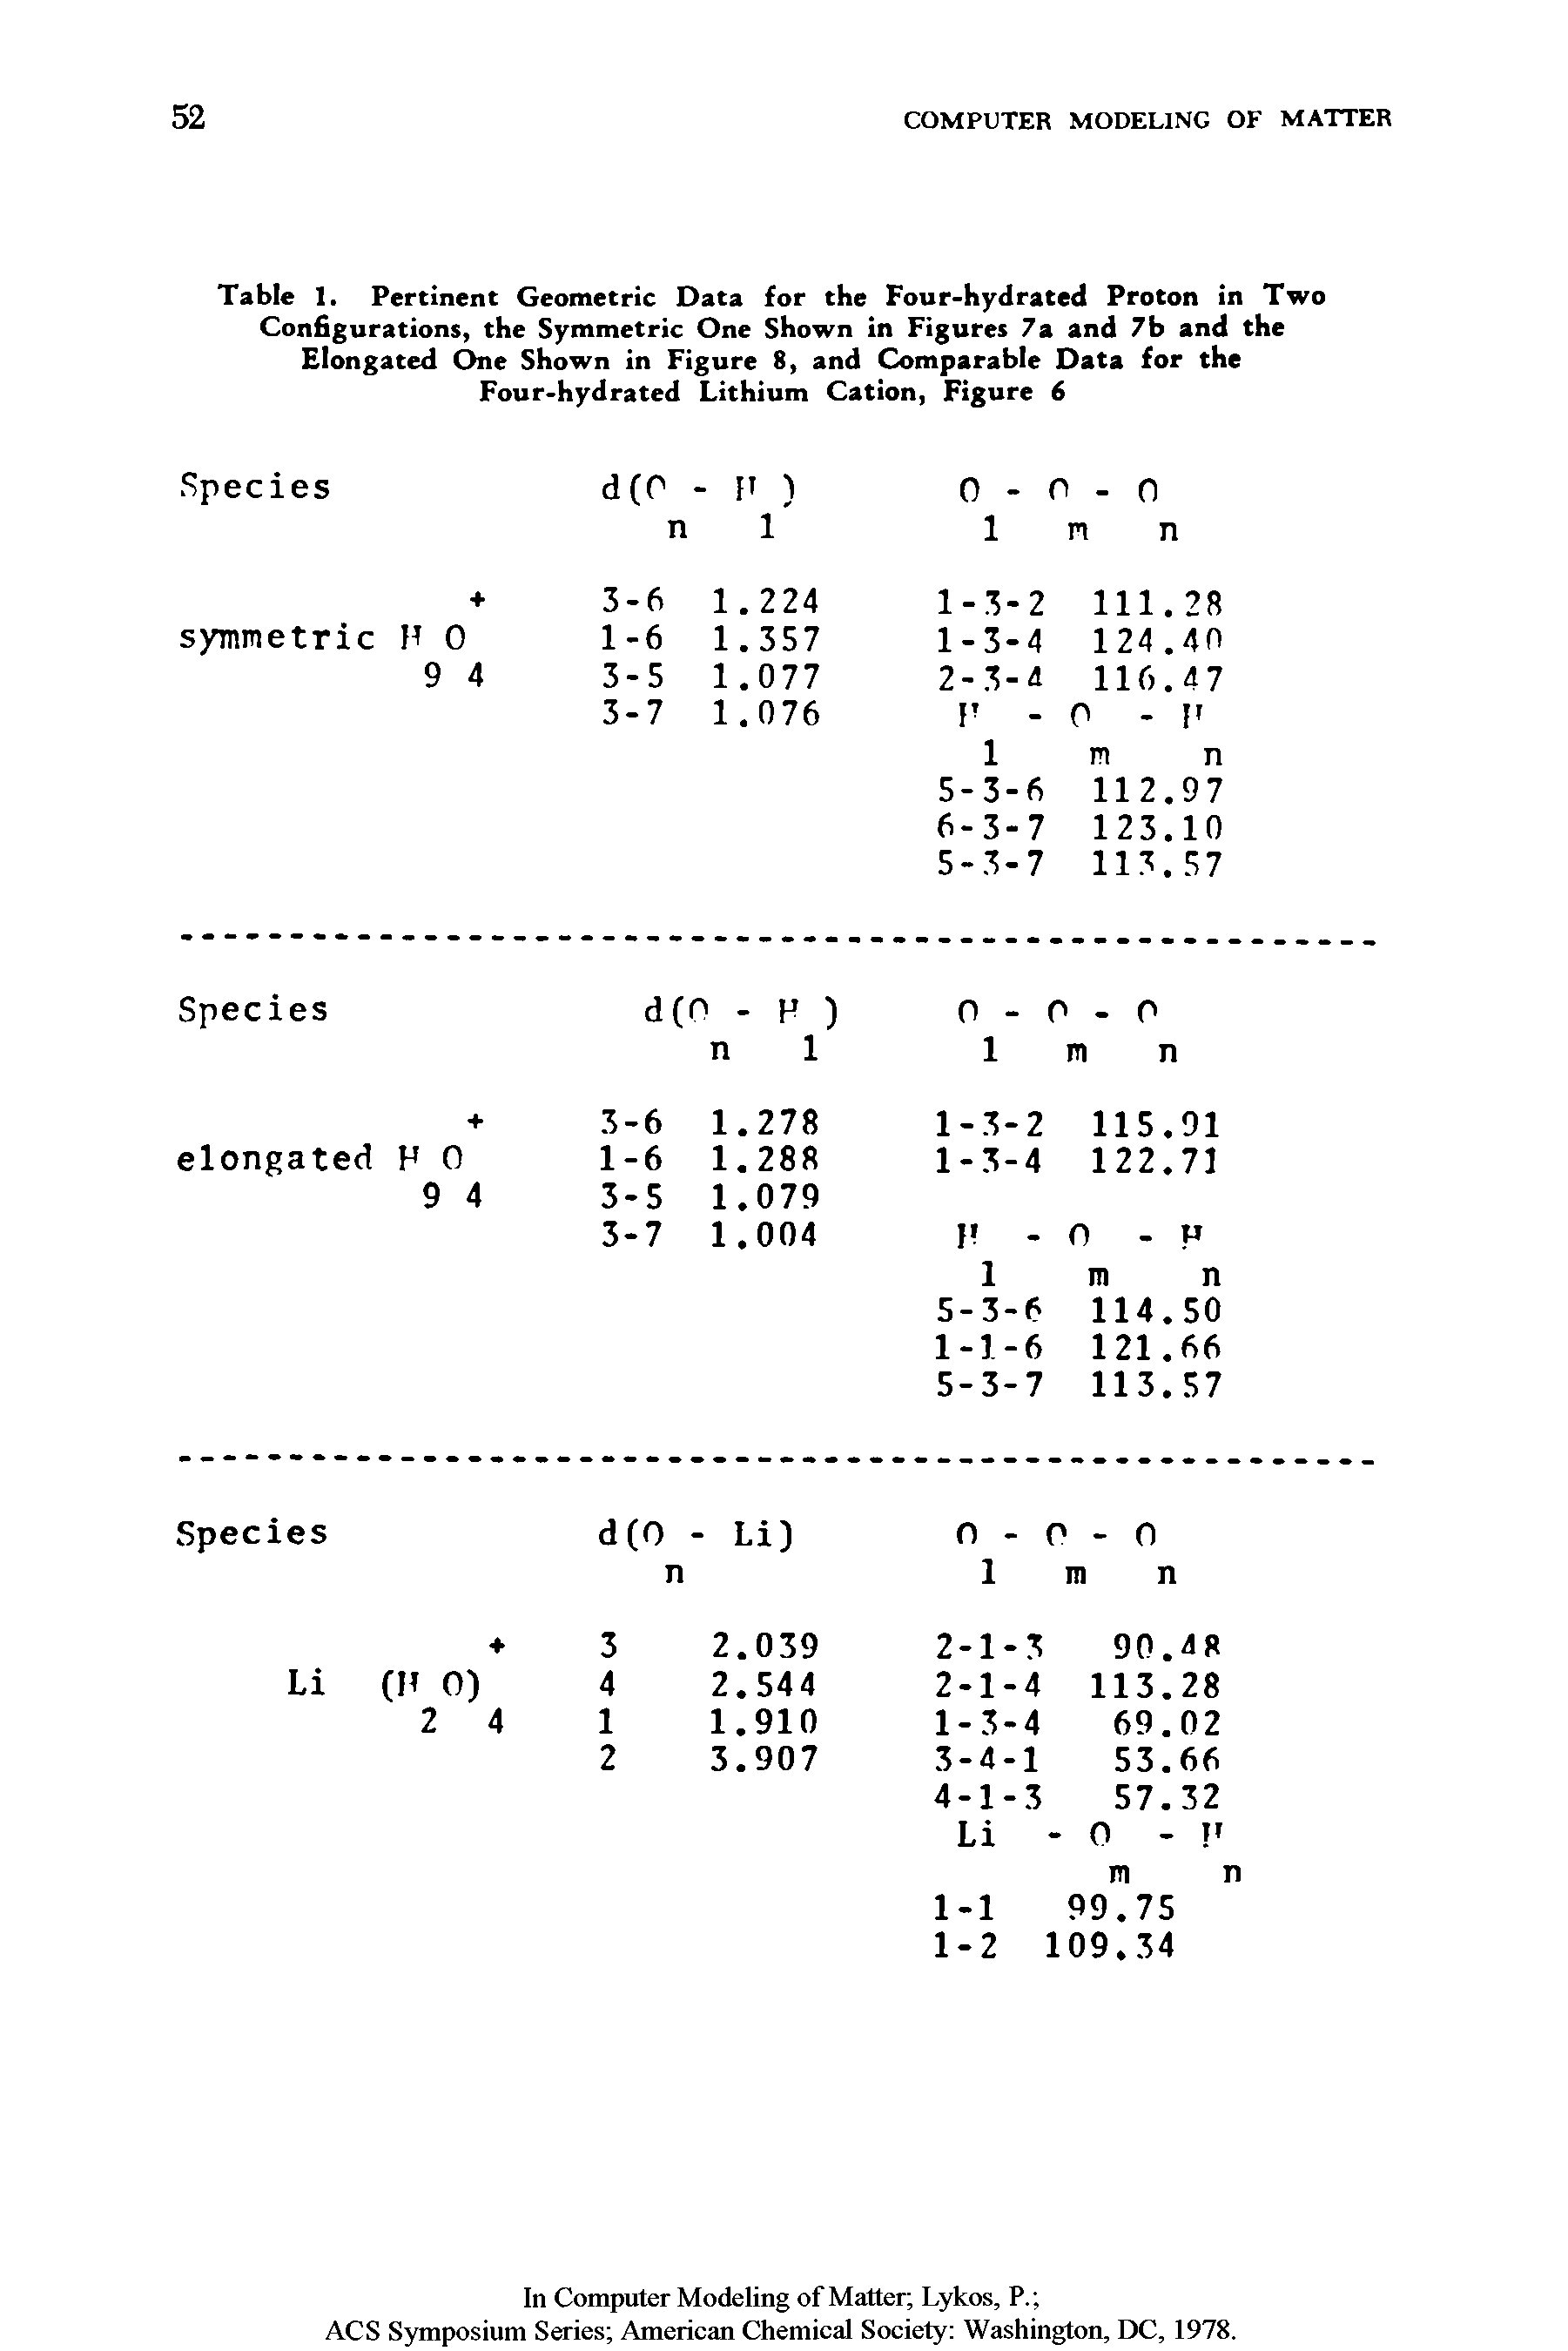 Table 1. Pertinent Geometric Data for the Four-hydrated Proton in Two Configurations, the Symmetric One Shown in Figures 7a and 7b and the Elongated One Shown in Figure 8, and Comparable Data for the Four-hydrated Lithium Cation, Figure 6...